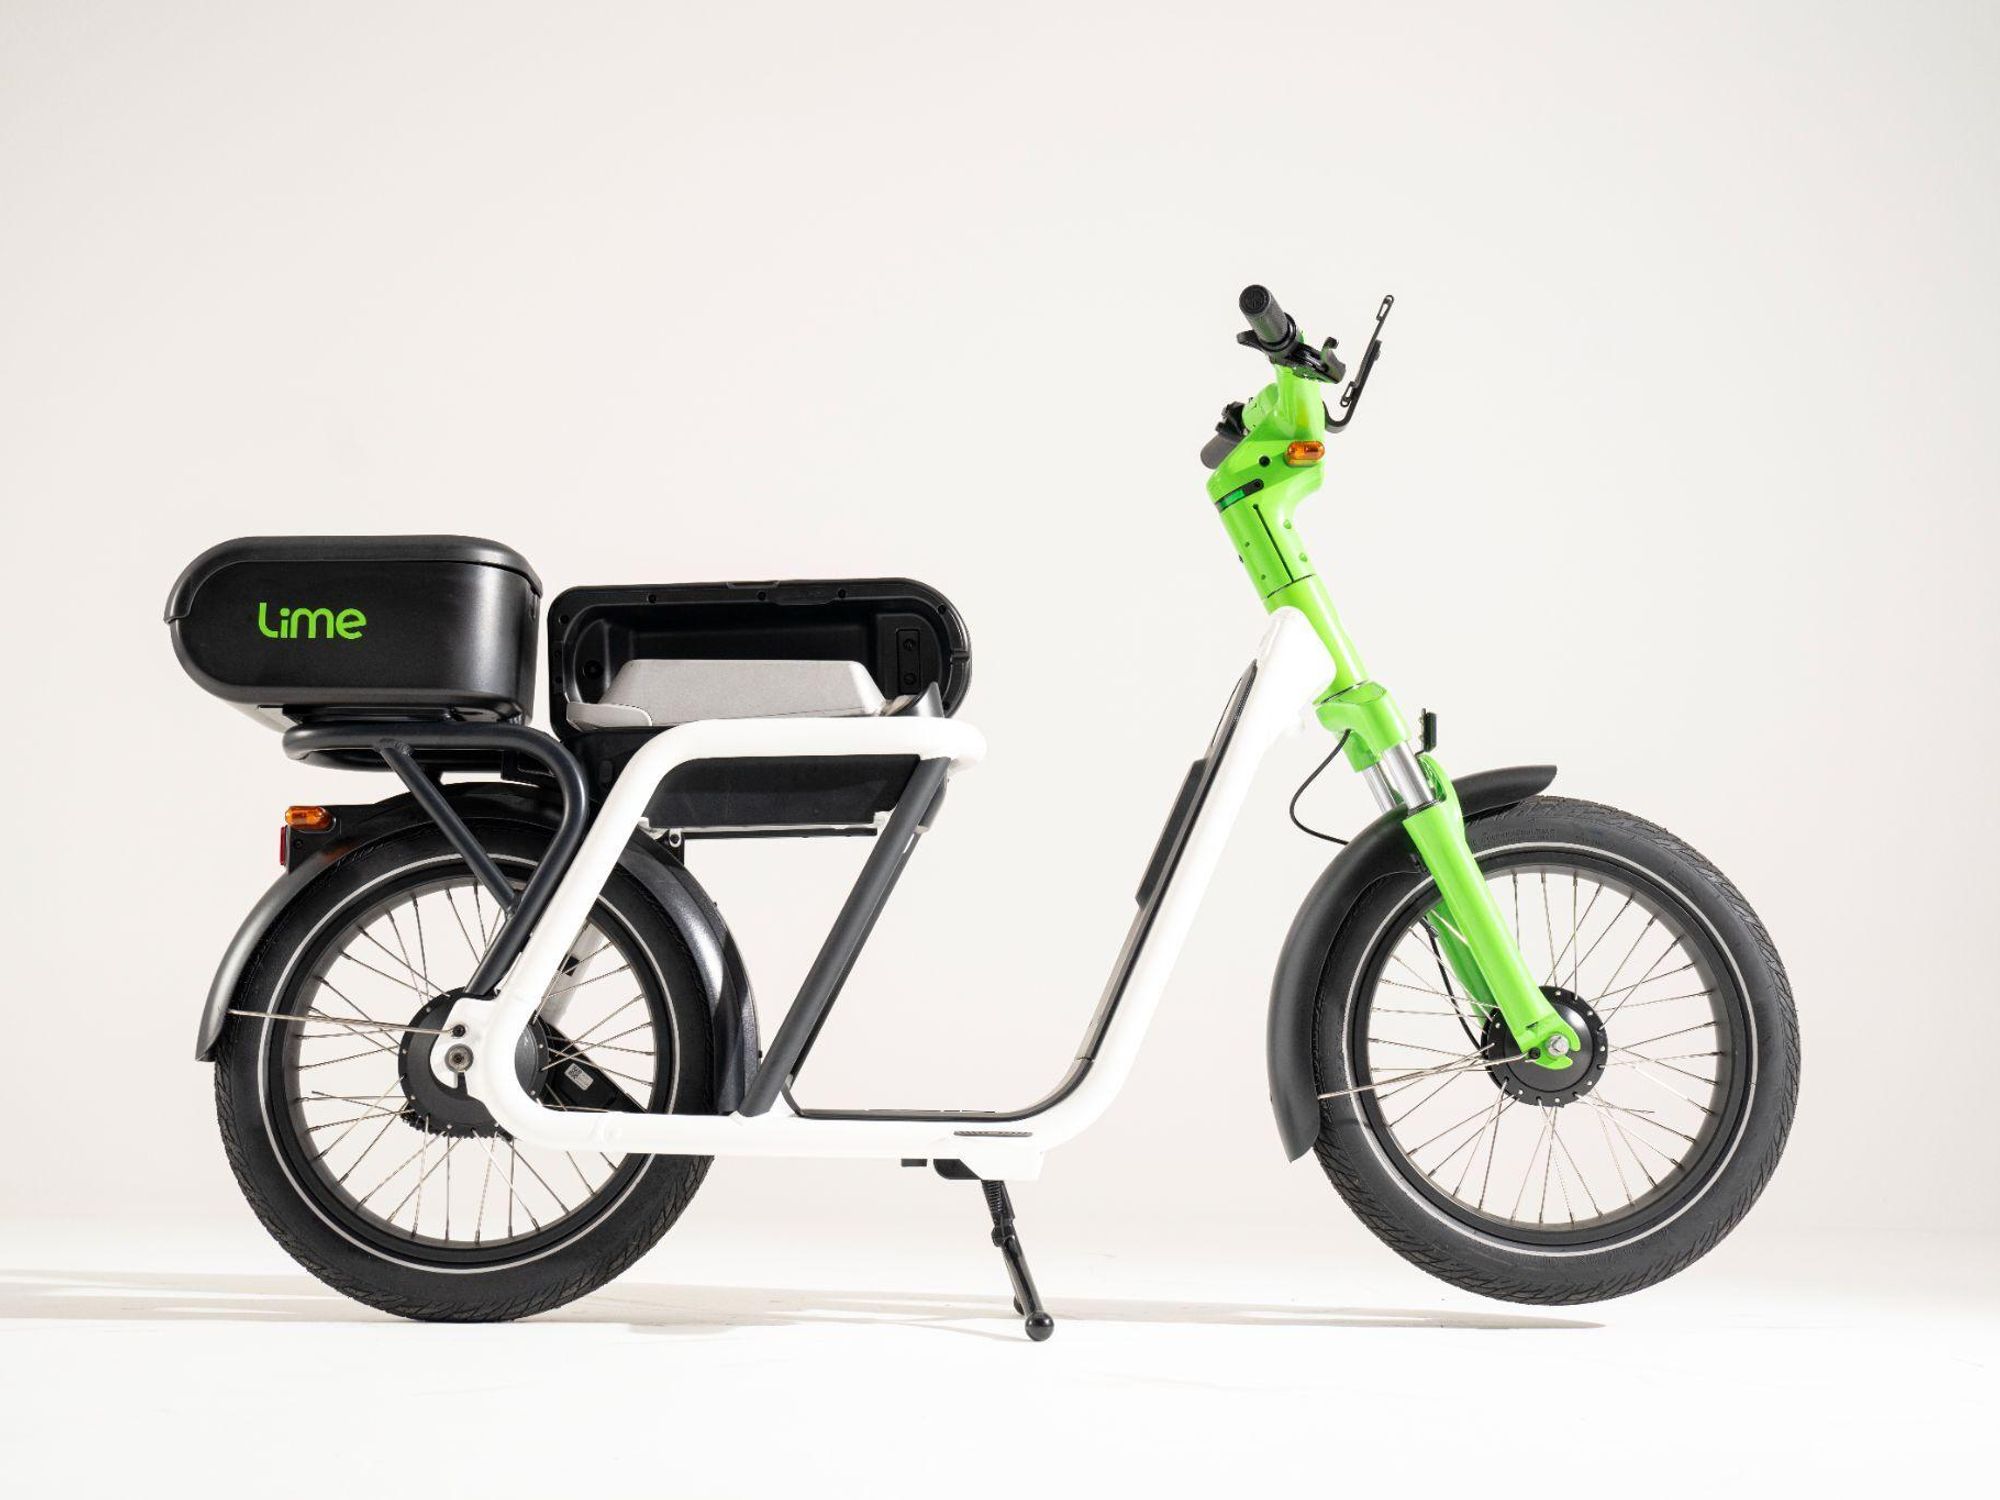 Lime Piloting New Electric Motorbike in Long Beach